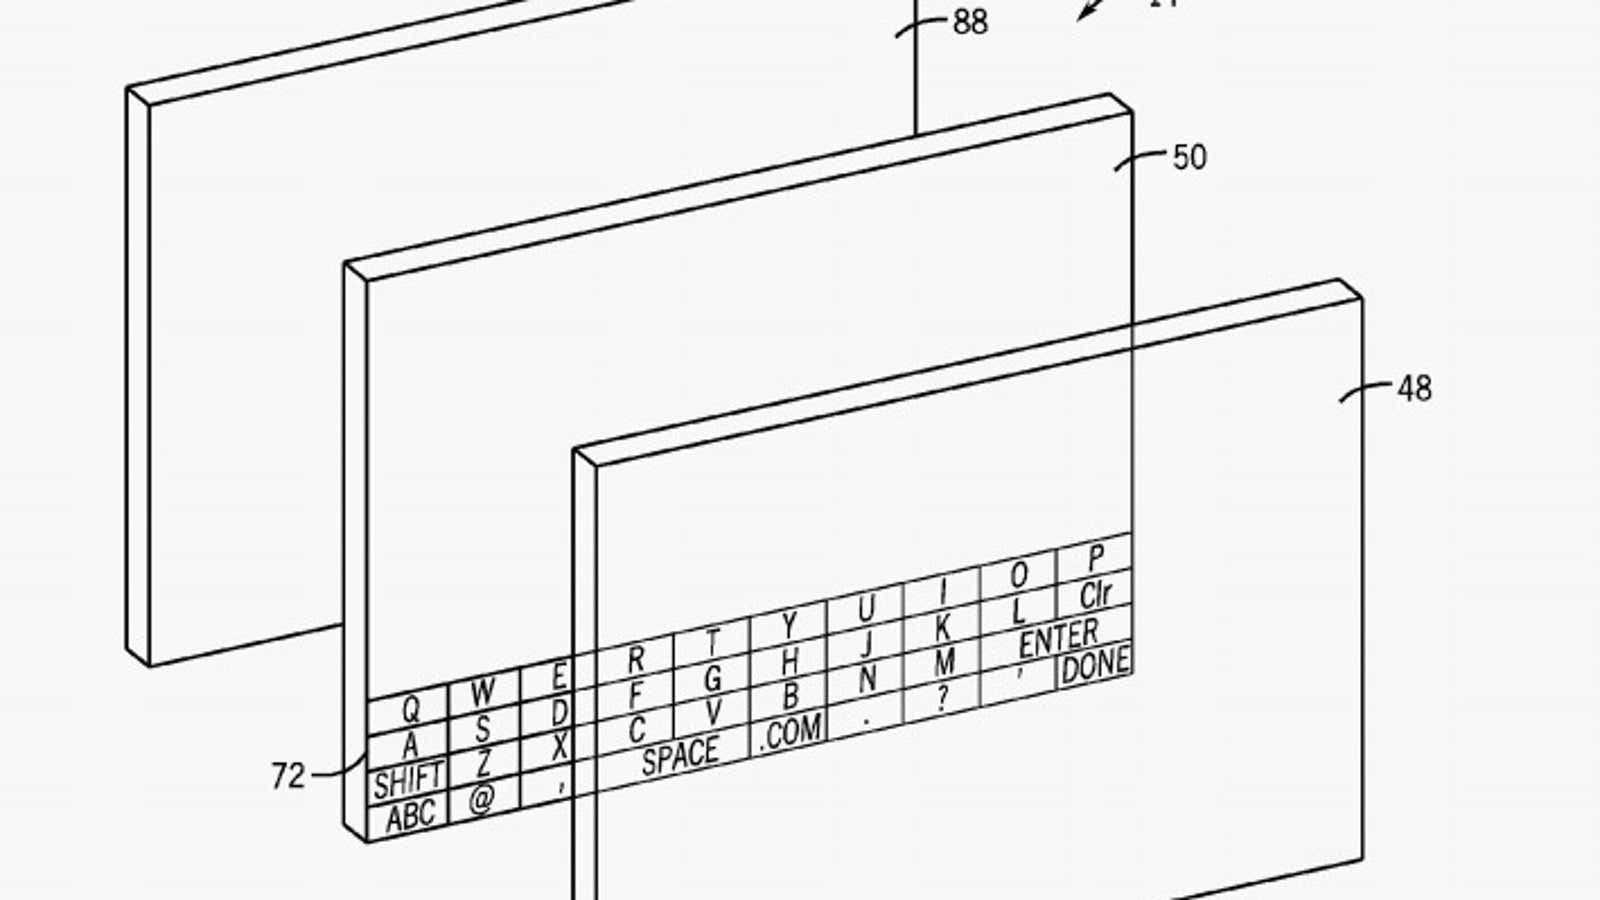 Apple’s patent suggests the display could’ve been used on tablets too.